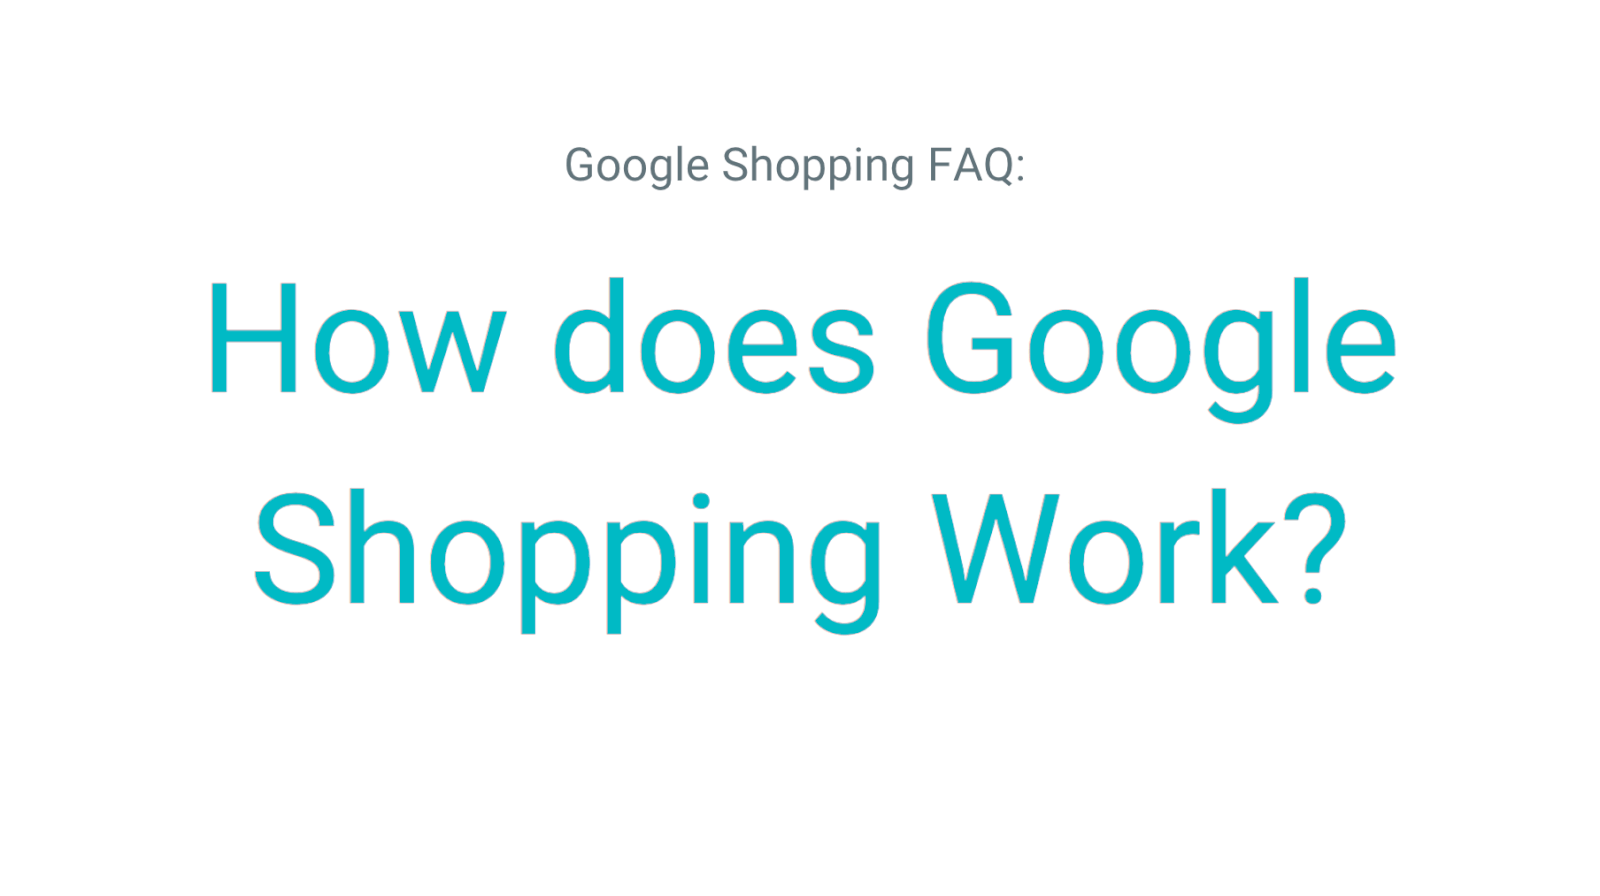 How does Google Shopping work?